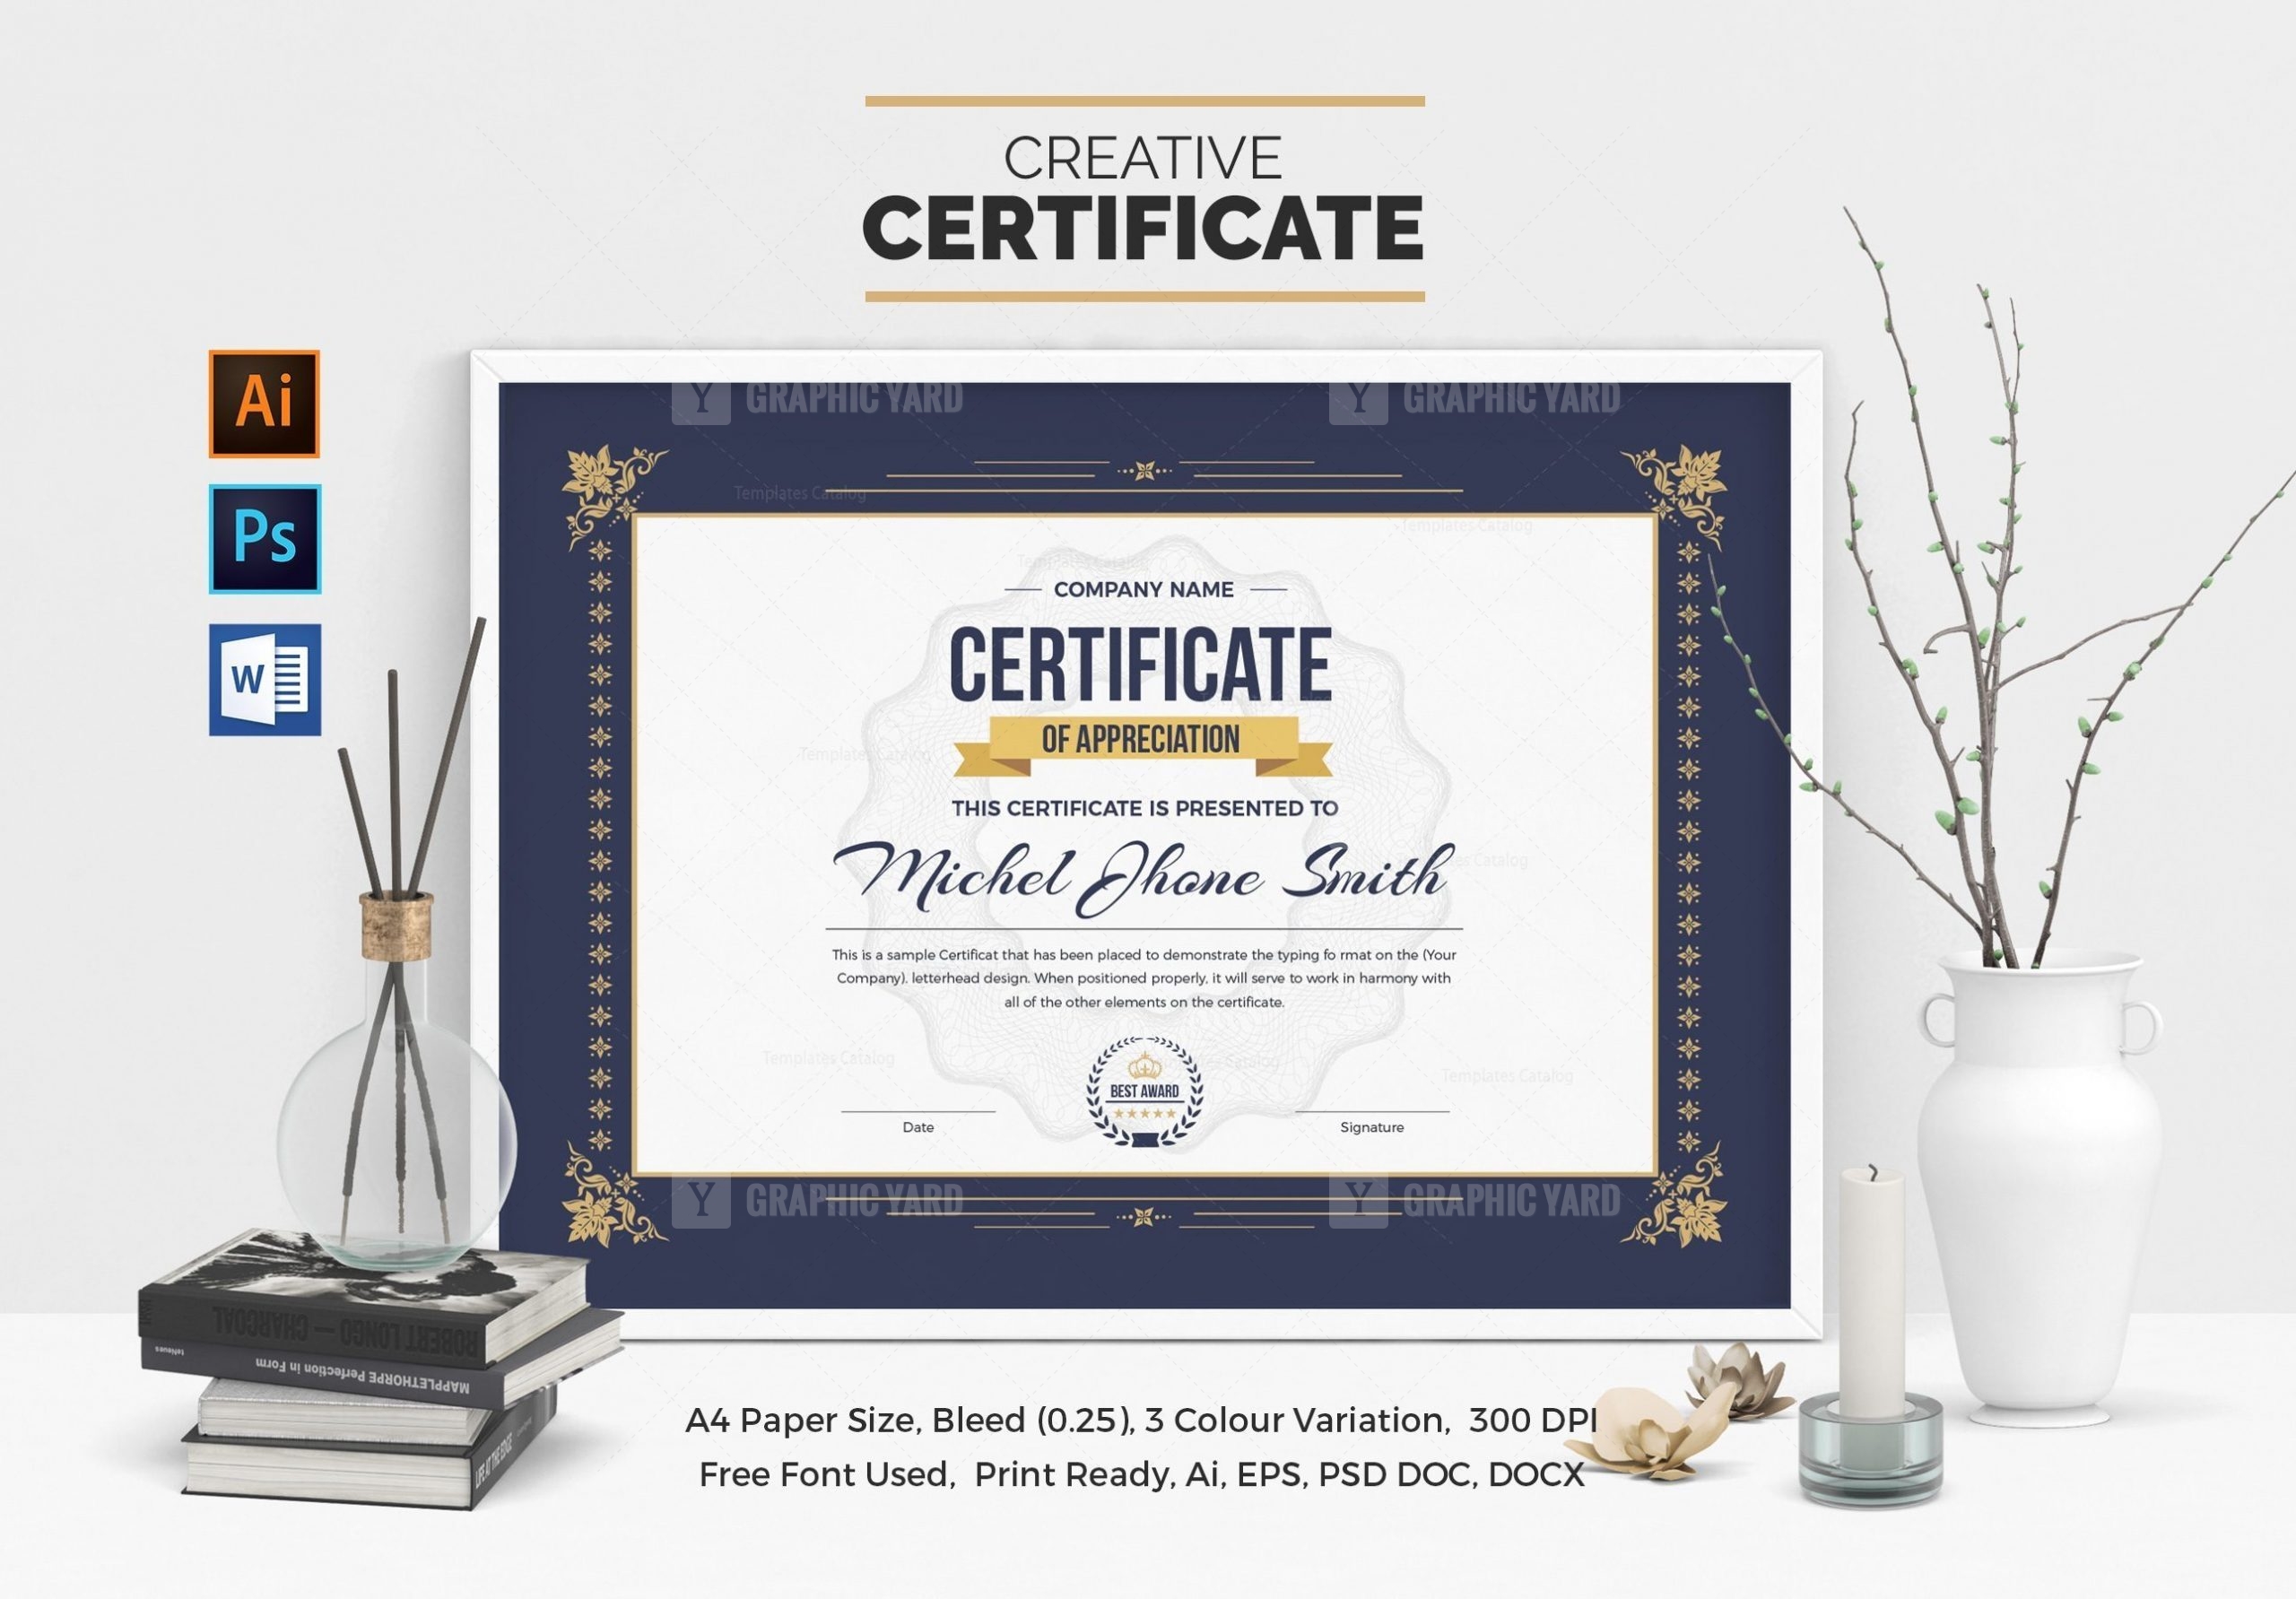 Certificate Template With Classic Design · Graphic Yard Graphic Templates Store 2316